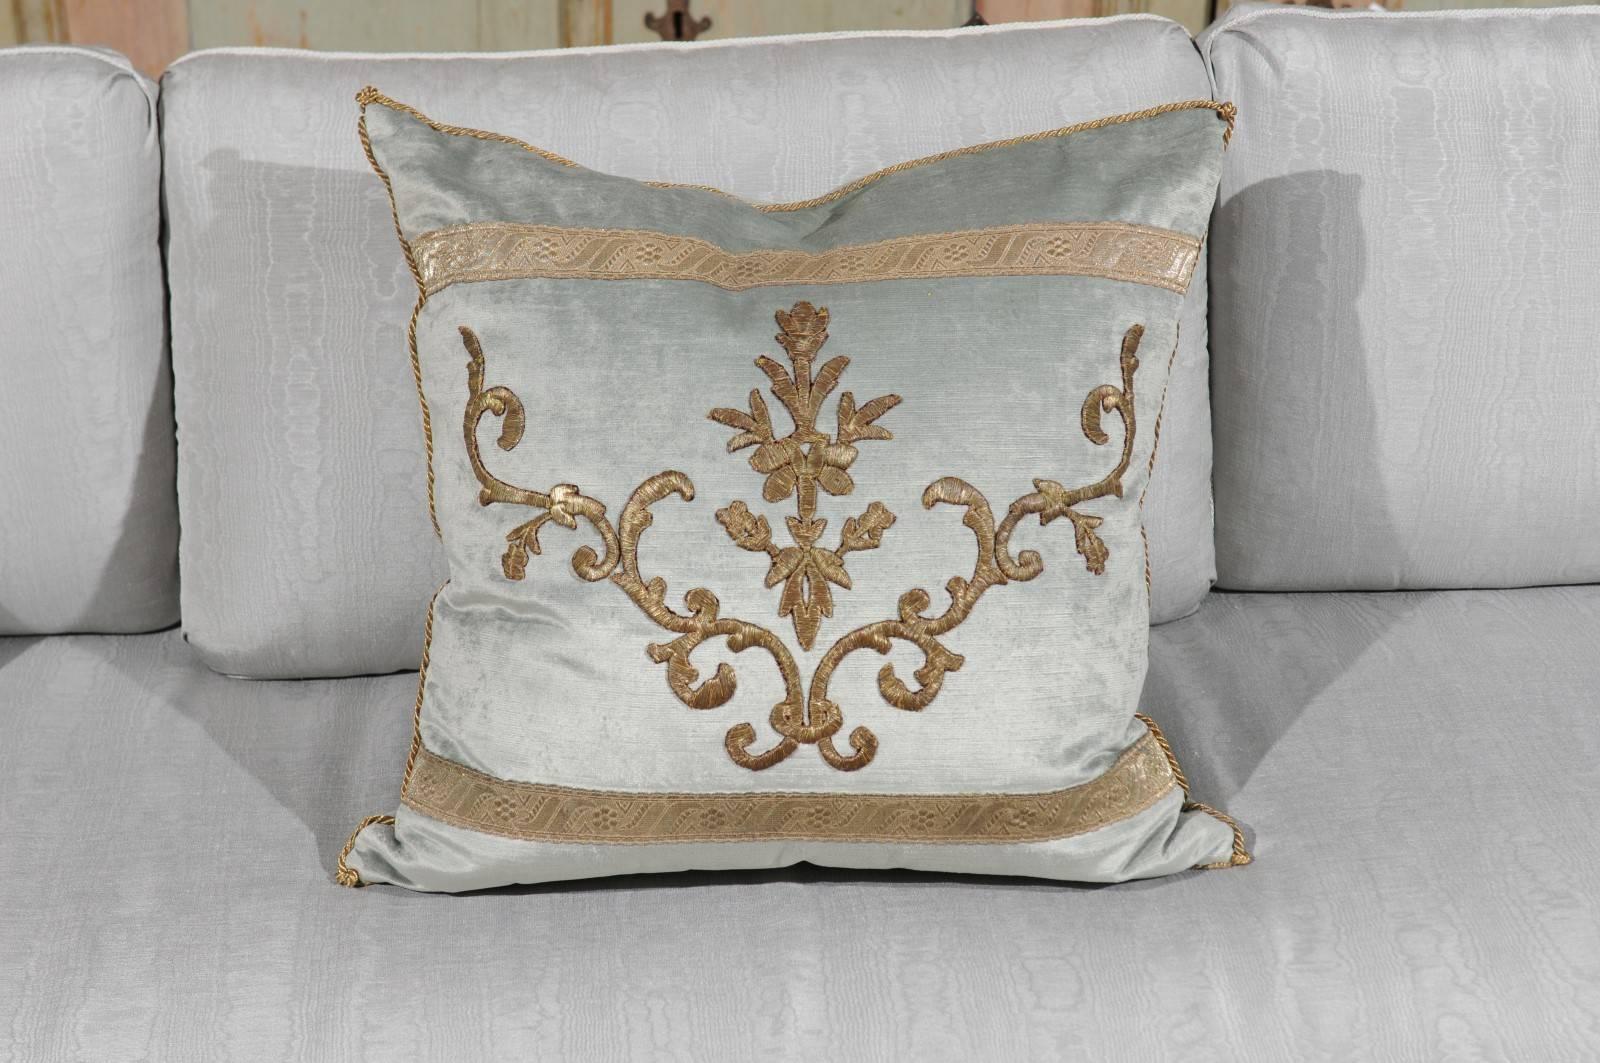 Contemporary Pale French Blue Velvet Pillow Made of Ottoman Empire Gold Metallic Embroidery